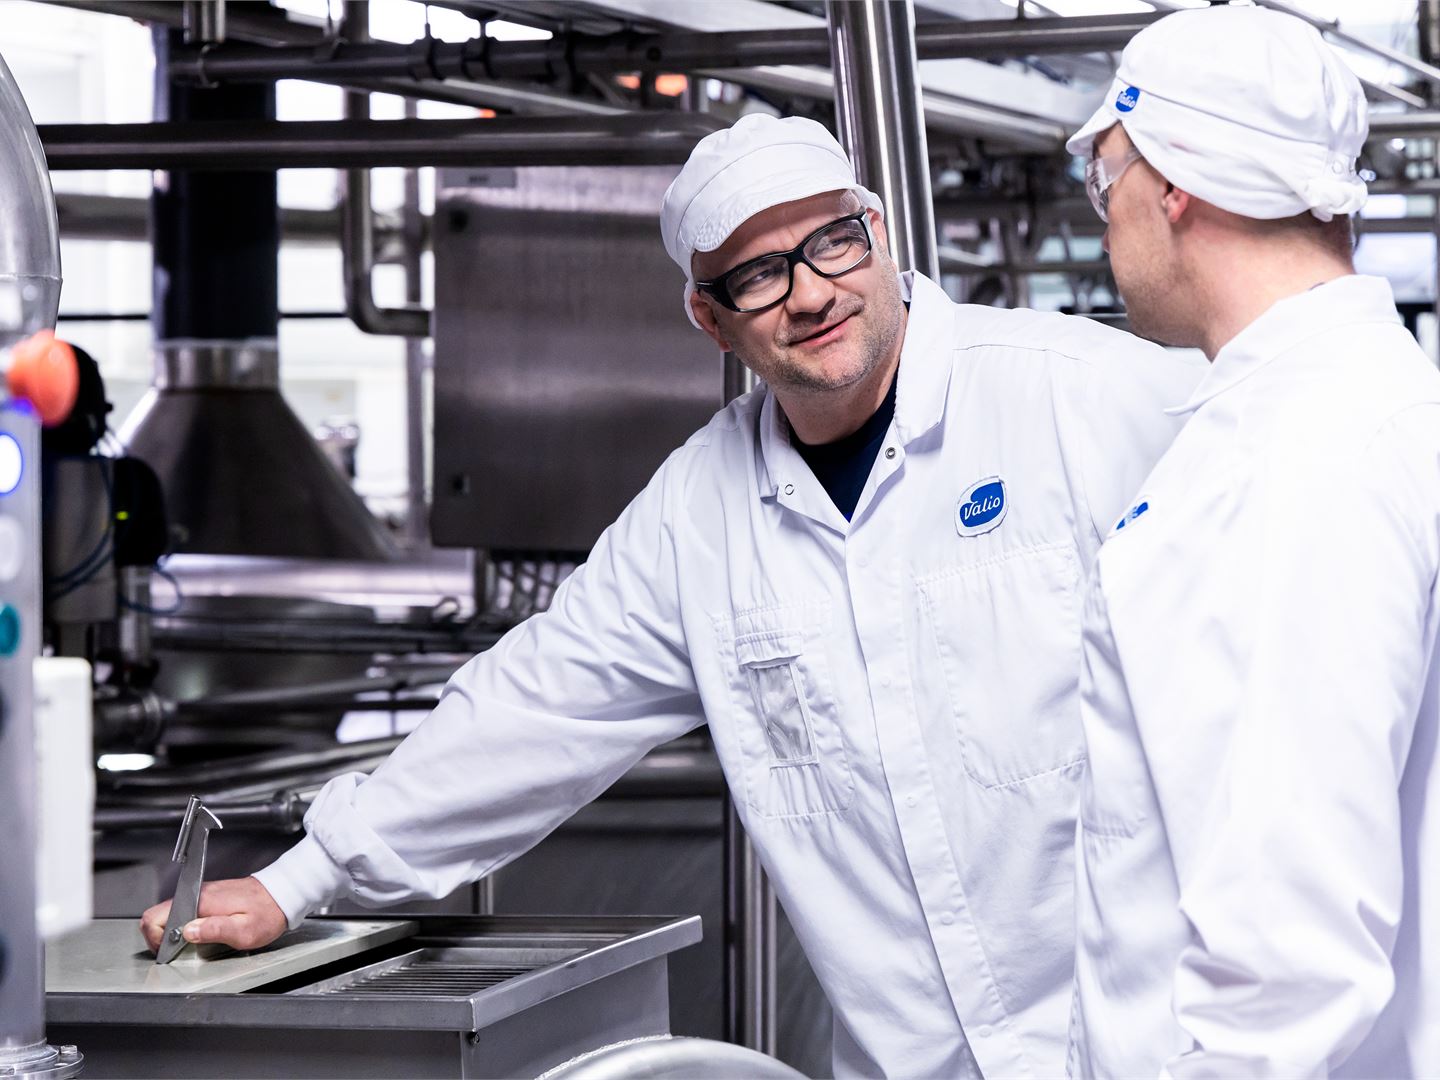 Sustainably produced ingredients help food manufacturers compete in the market